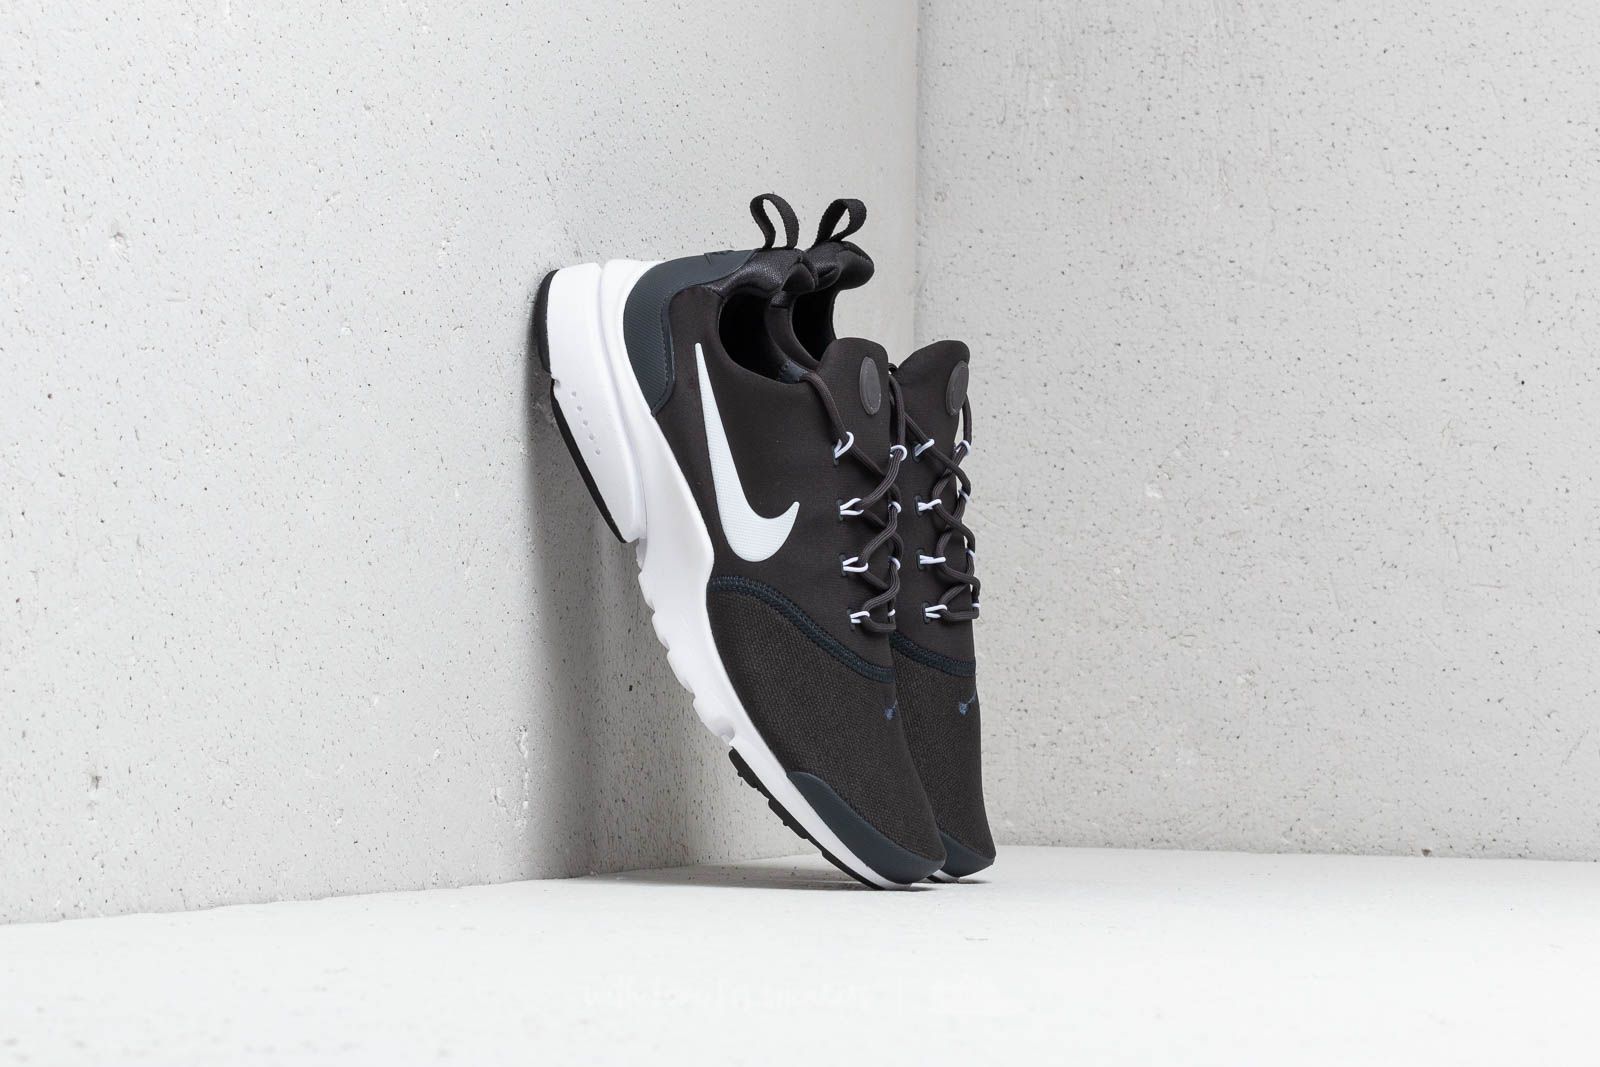 Chaussures et baskets homme Nike Presto Fly Anthracite/ White-Black